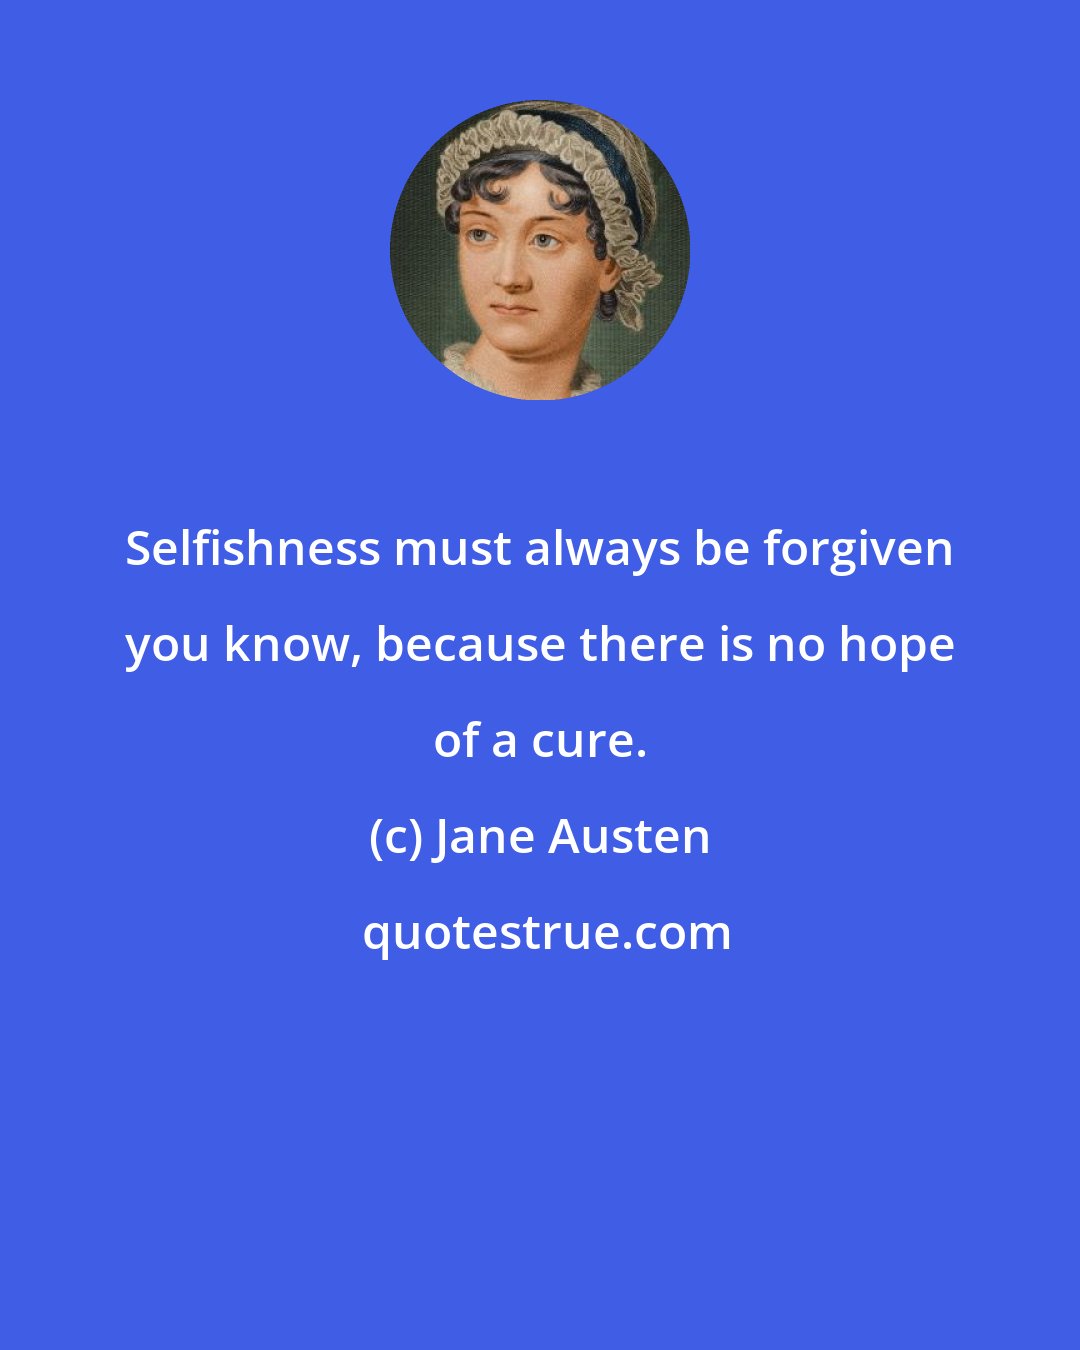 Jane Austen: Selfishness must always be forgiven you know, because there is no hope of a cure.